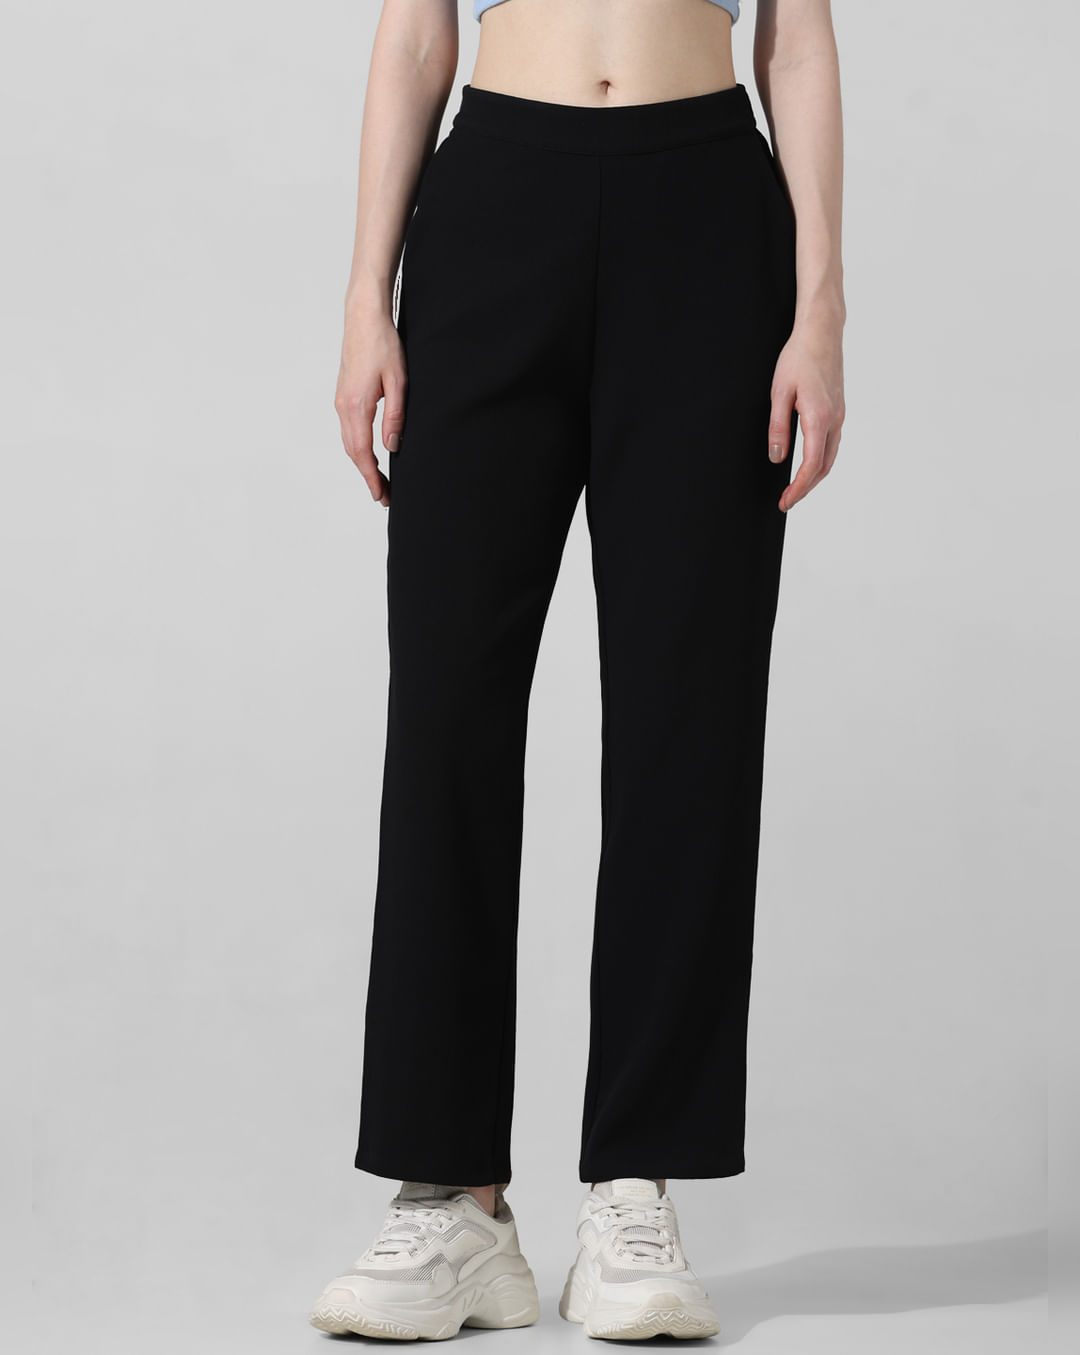 Dunnes Stores  Black Slim Fit Stretch Trouser